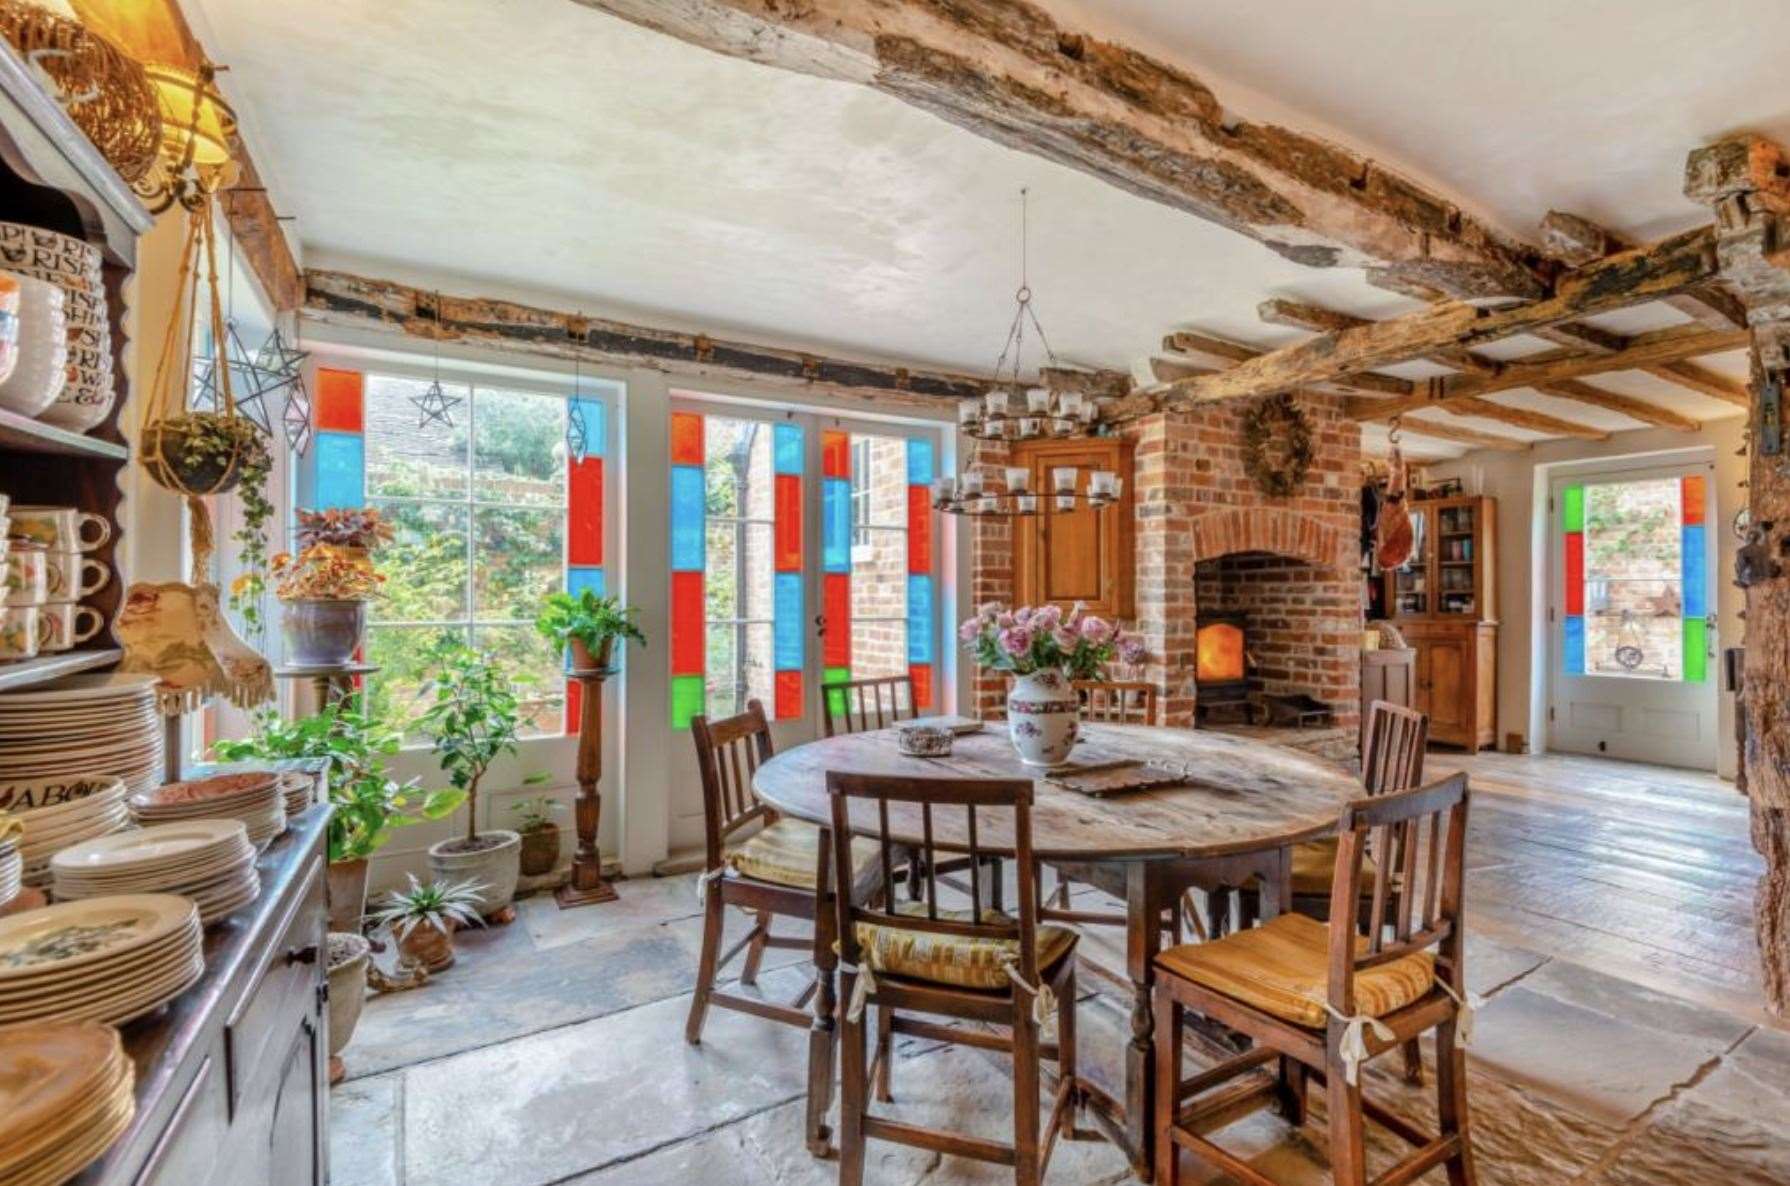 Stained glass windows are a feature inside the breakfast room. Picture: Strutt & Parker